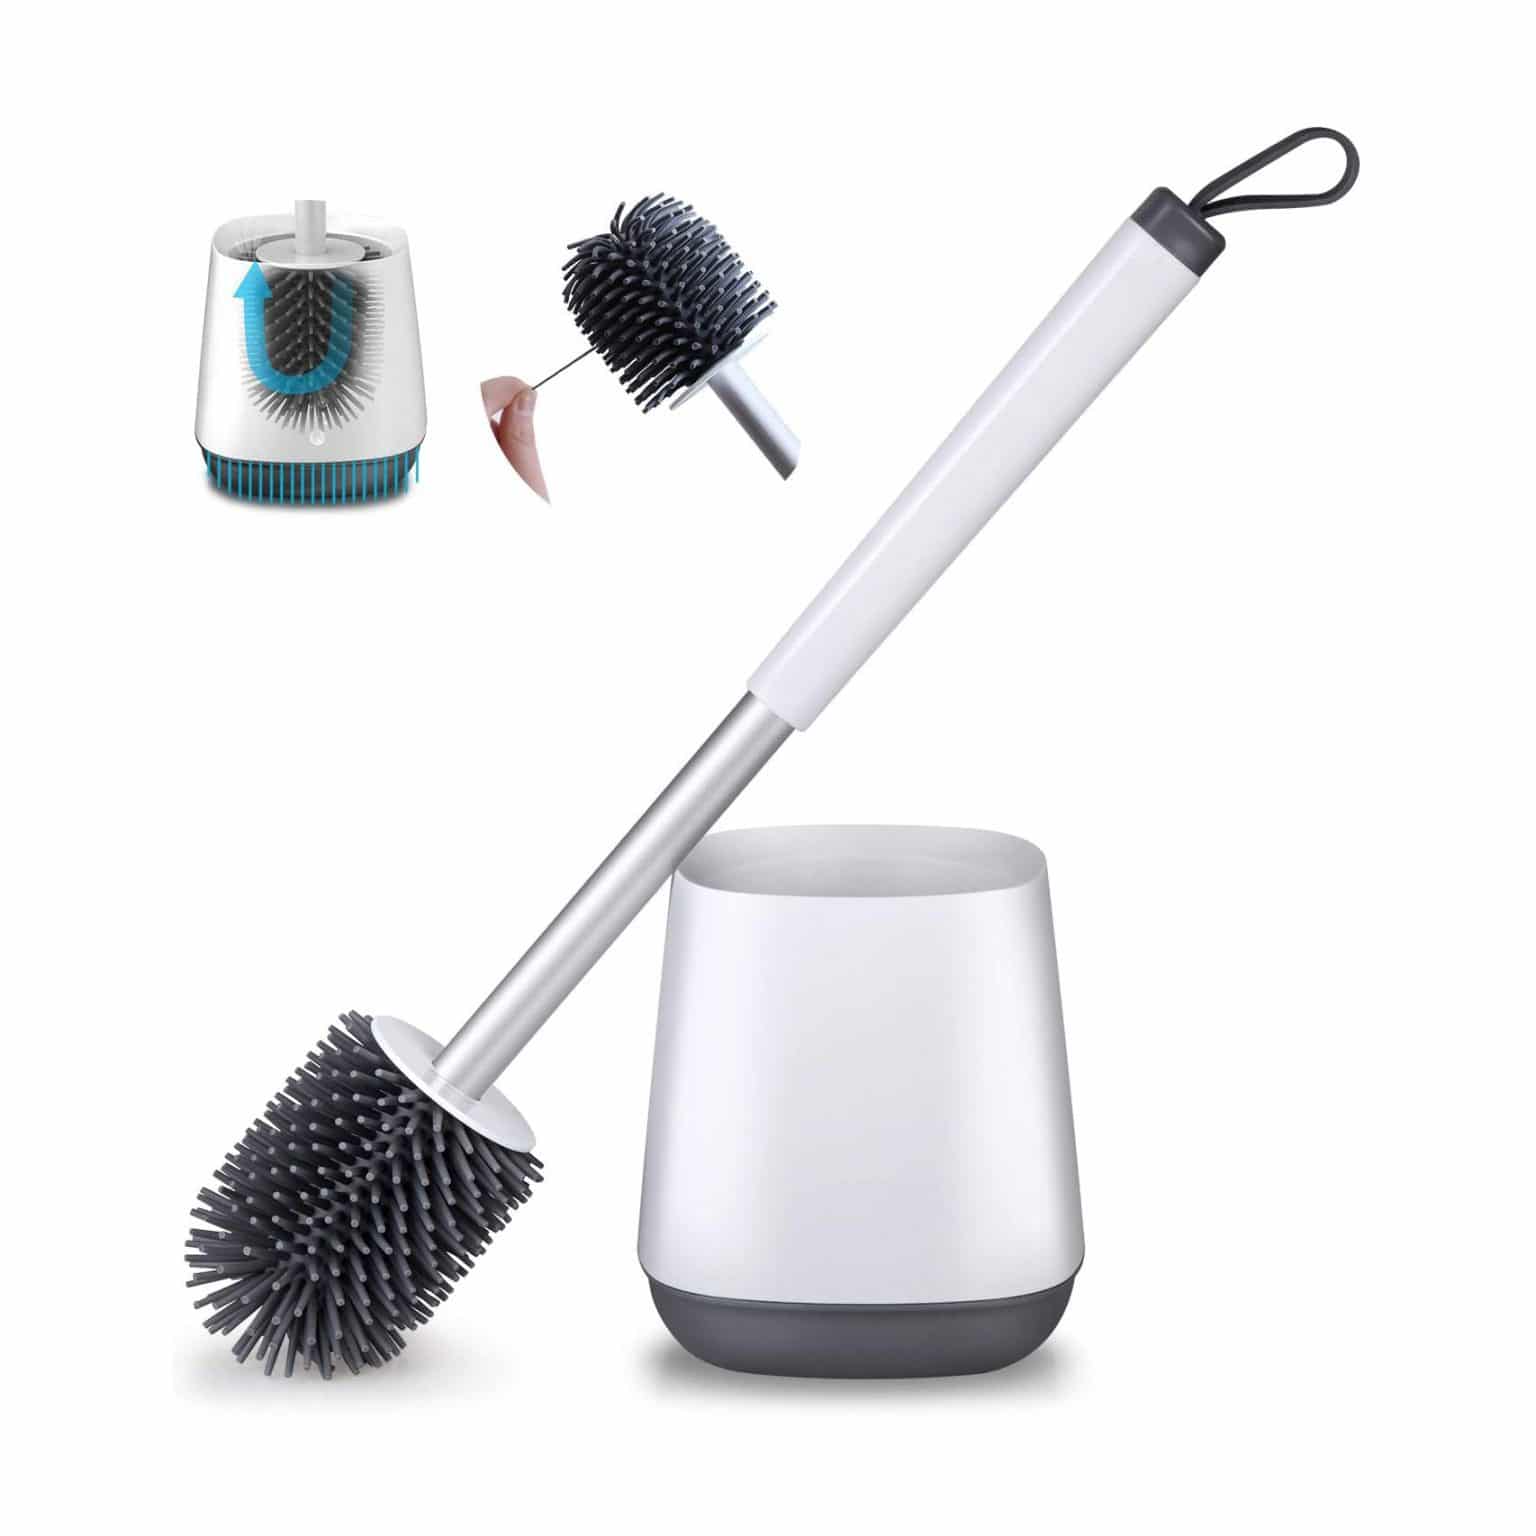 Top 10 Best Toilet Bowl Brushes in 2021 Reviews | Buyer's Guide